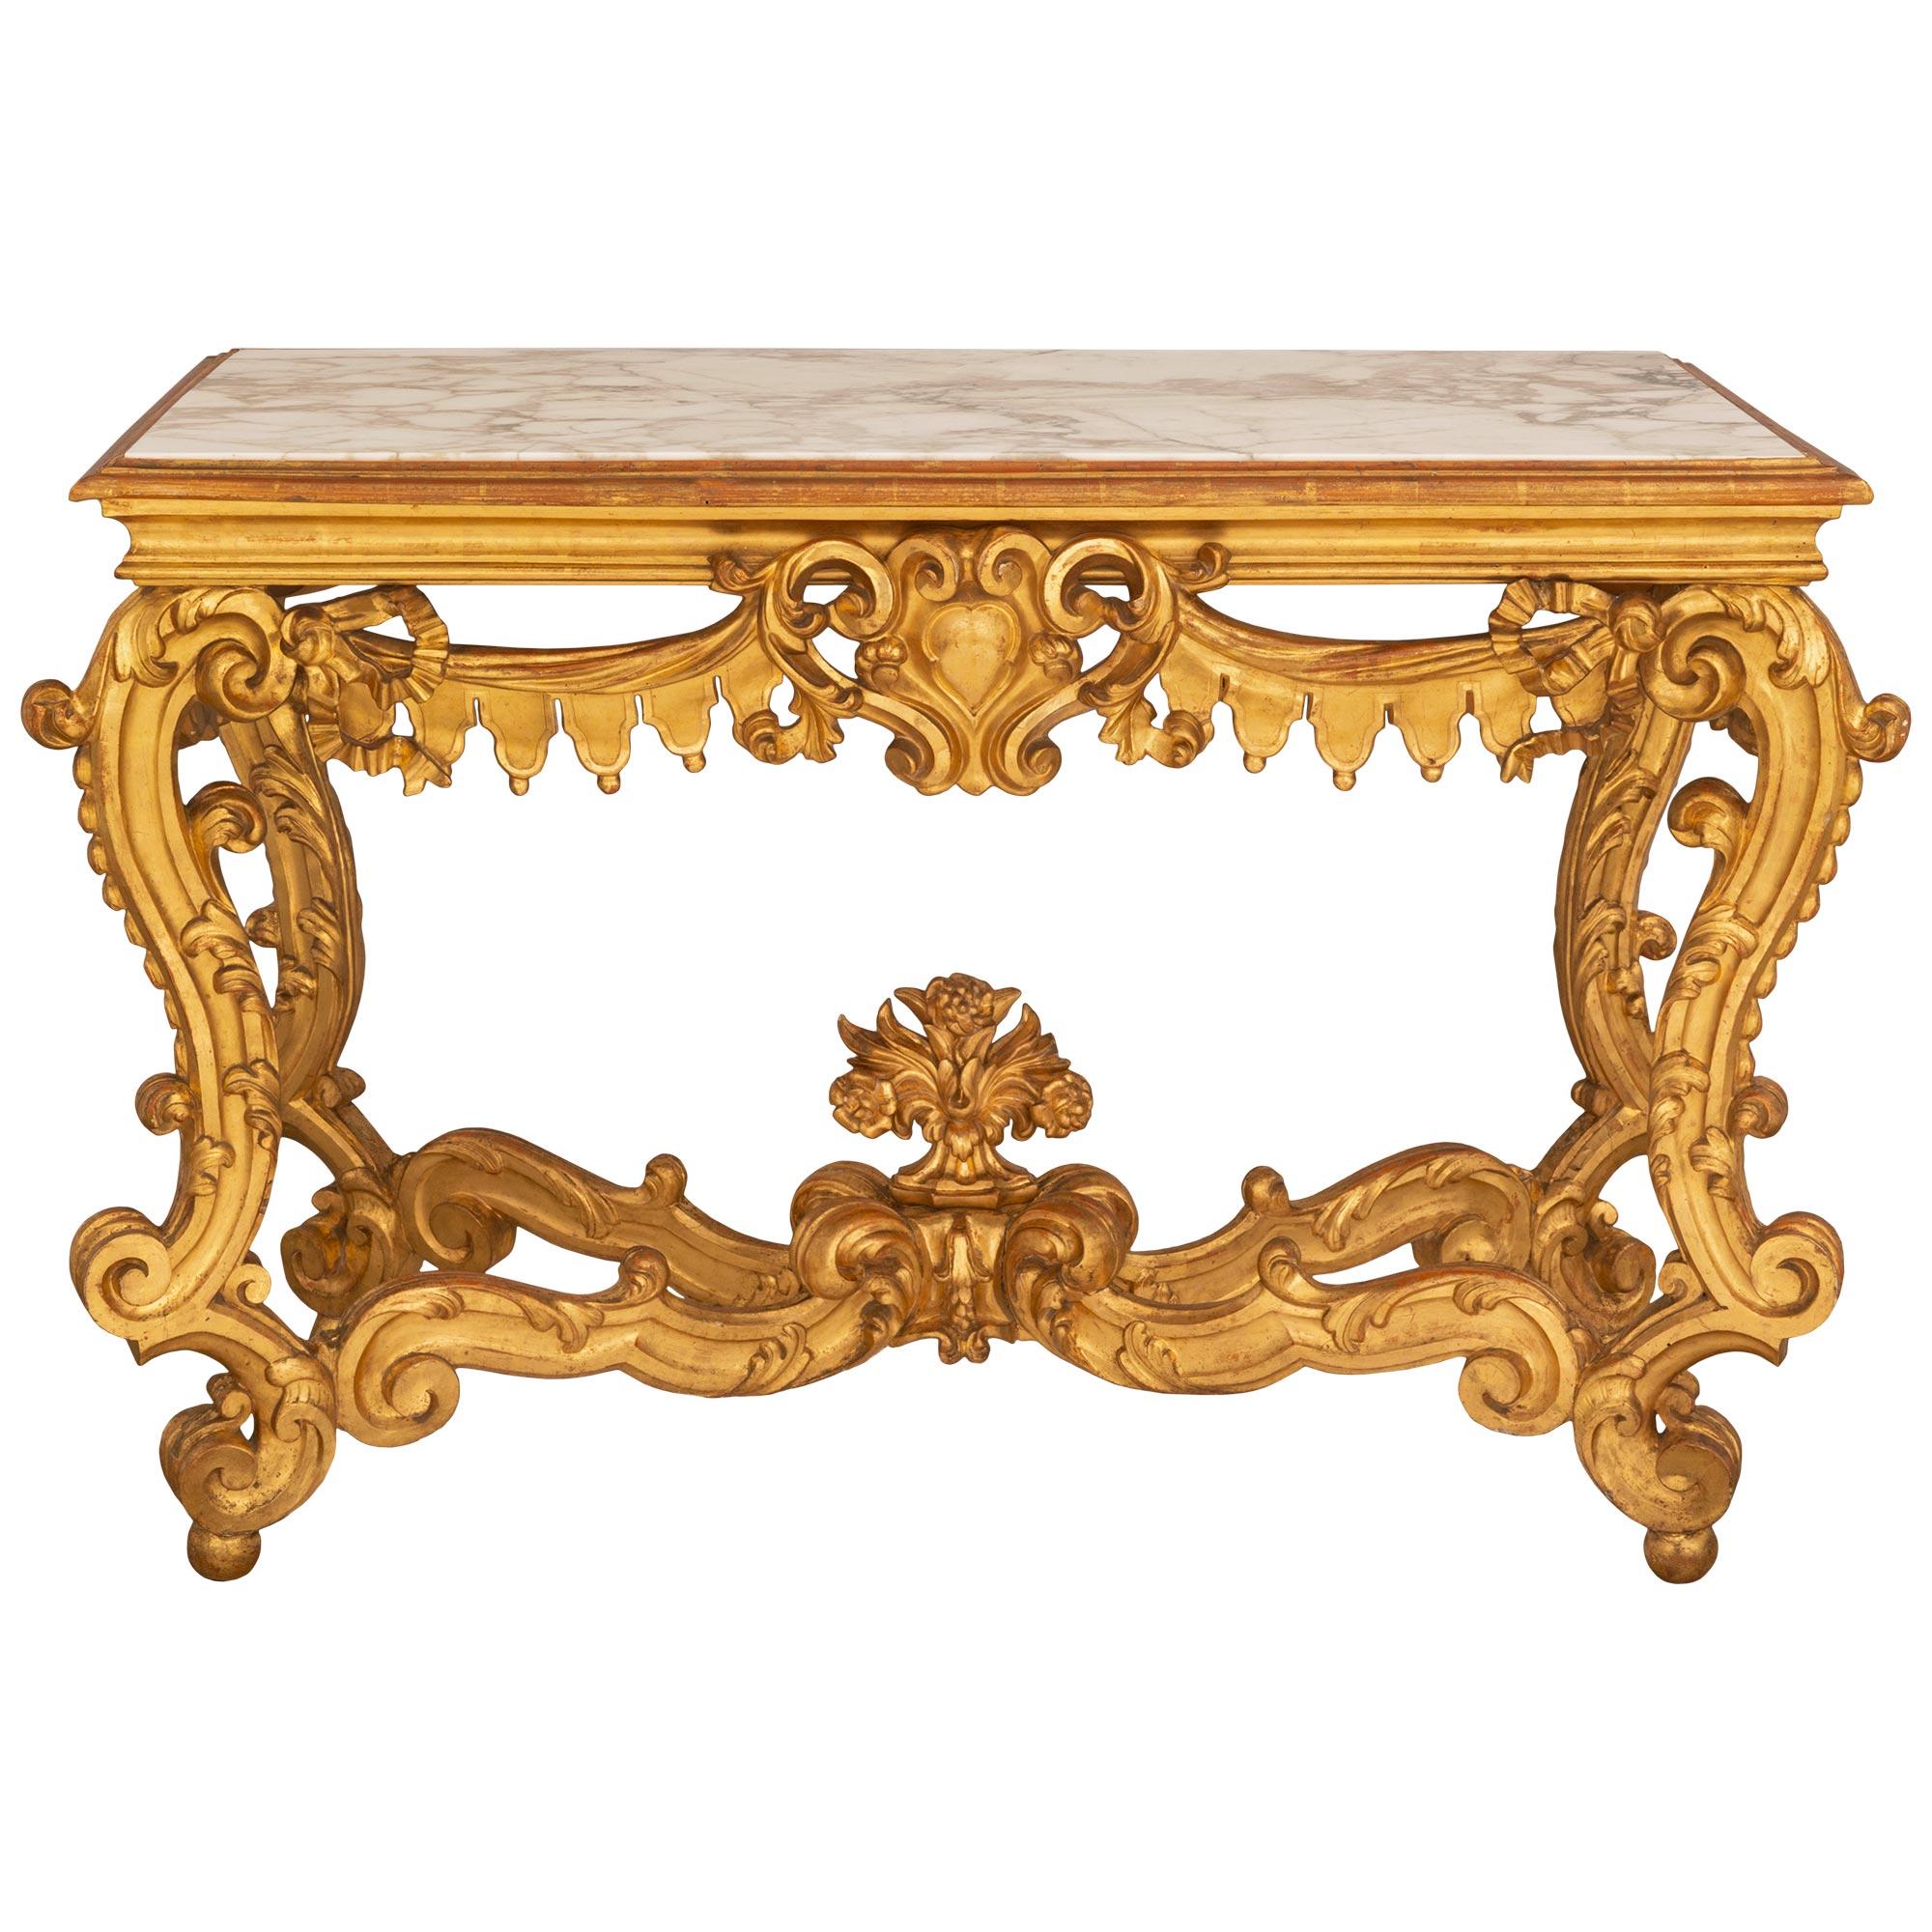 Italian Mid-19th Century Venetian Giltwood and Marble Freestanding Console For Sale 7